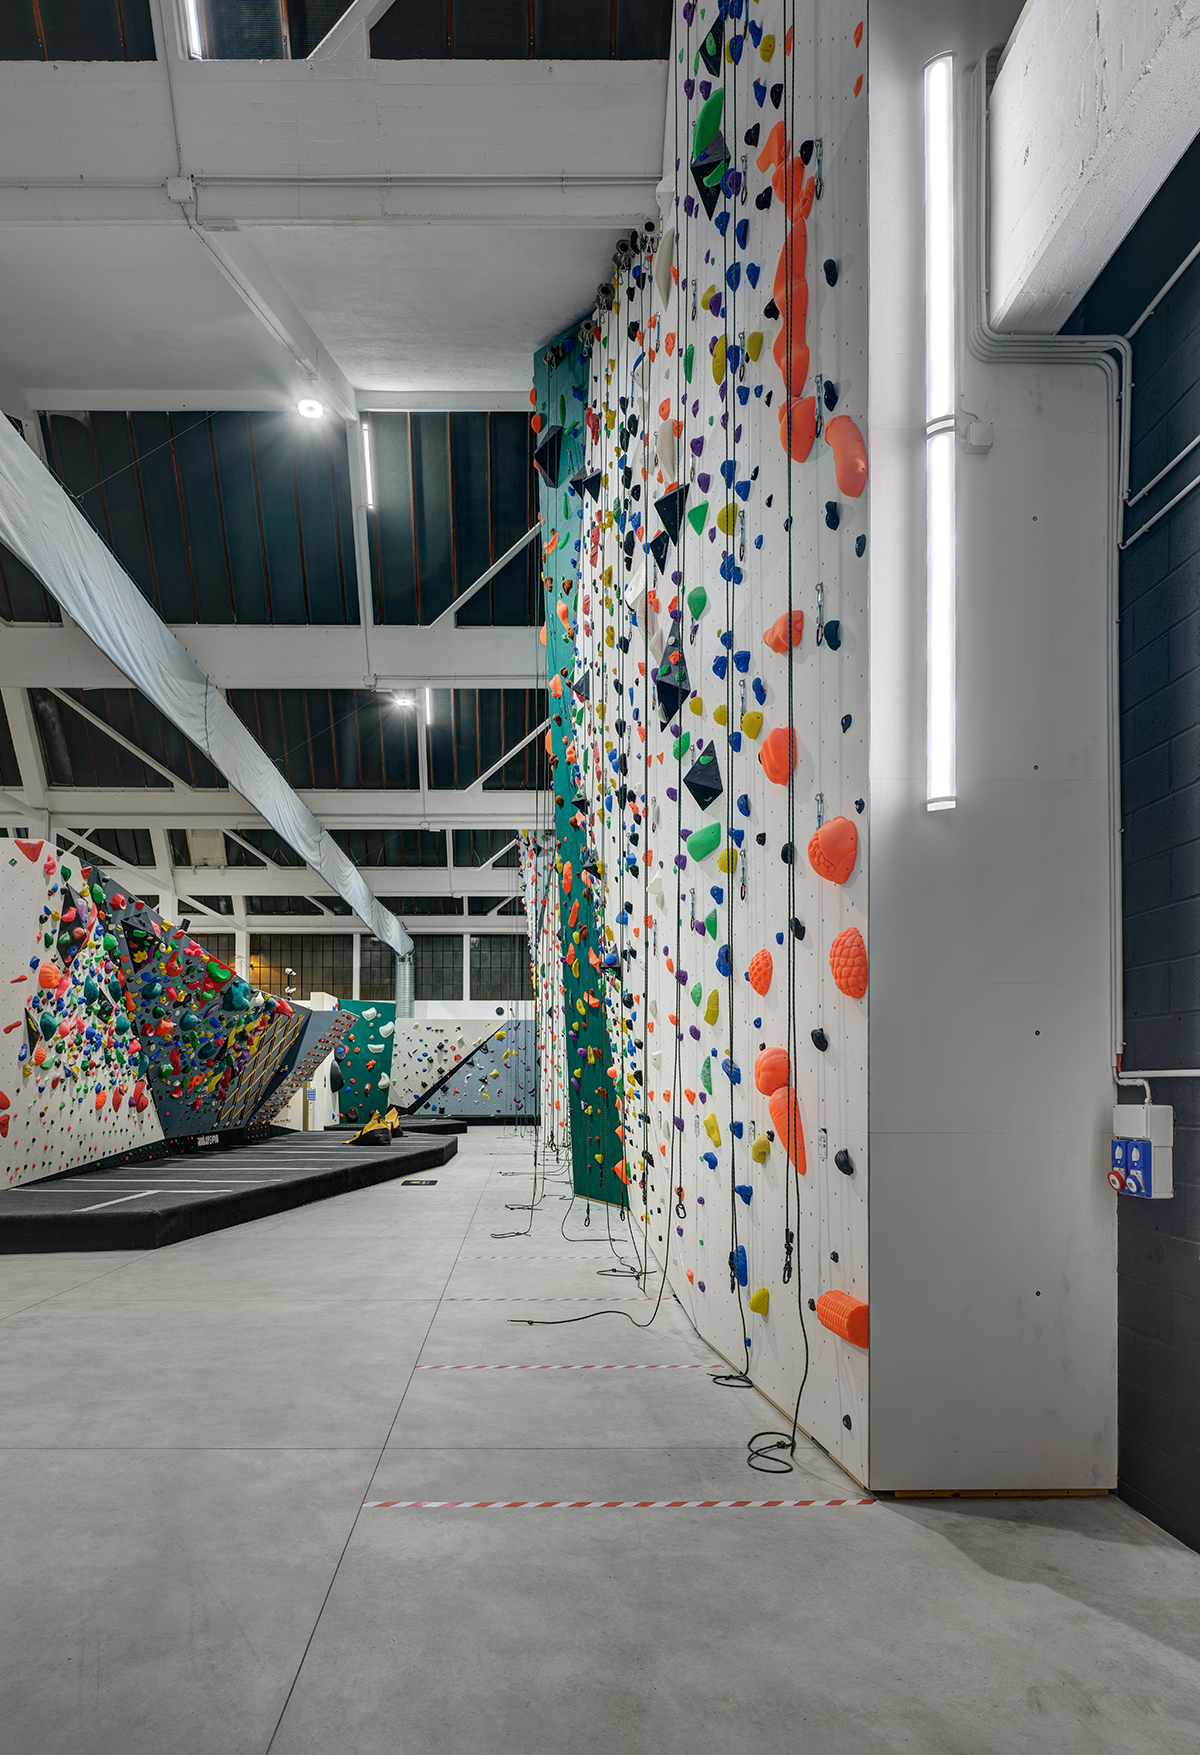 Orobia Climbing indoor sport facility